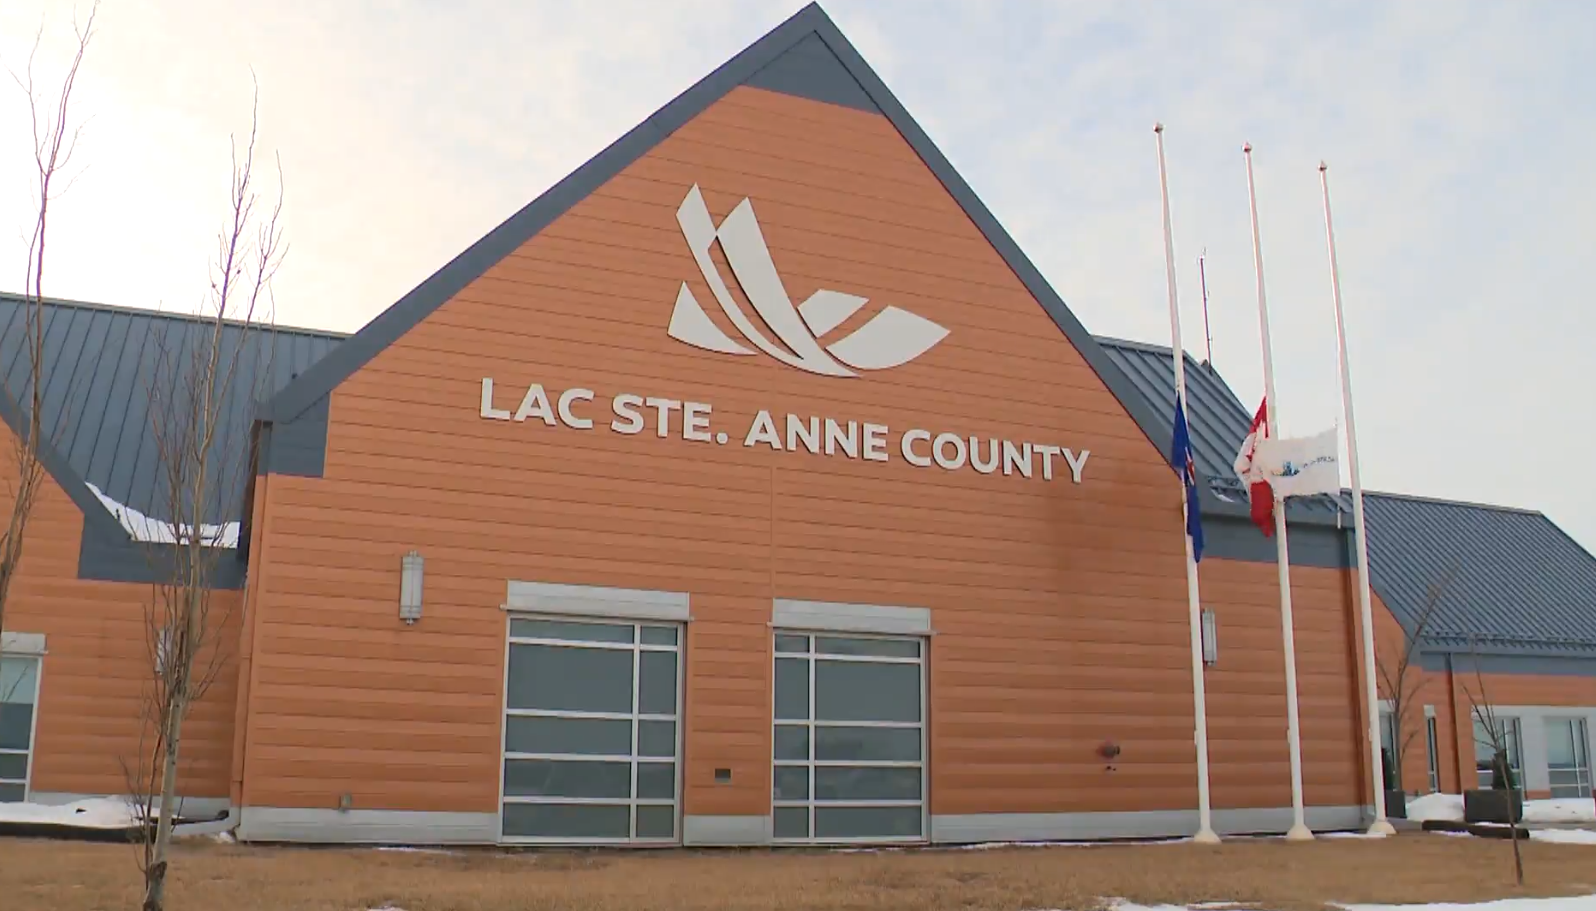 Farmers frustrated over proposed Lac. Ste. Anne County land tax